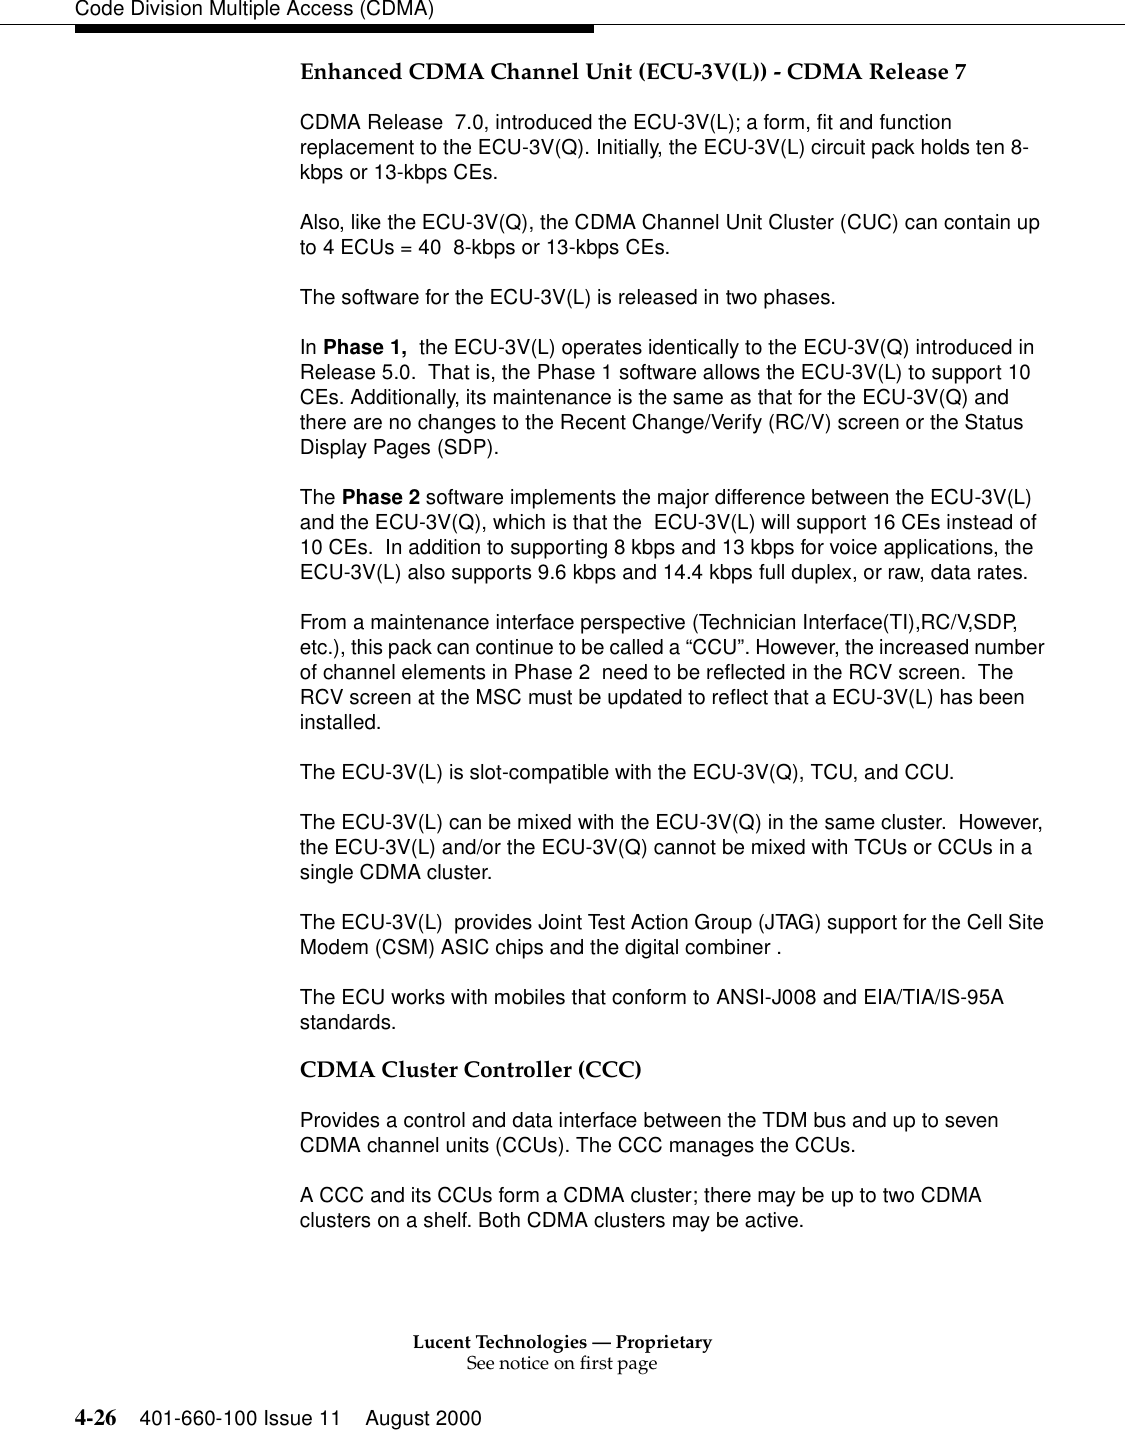 Lucent Technologies — ProprietarySee notice on first page4-26 401-660-100 Issue 11 August 2000Code Division Multiple Access (CDMA)Enhanced CDMA Channel Unit (ECU-3V(L)) - CDMA Release 7CDMA Release  7.0, introduced the ECU-3V(L); a form, fit and function replacement to the ECU-3V(Q). Initially, the ECU-3V(L) circuit pack holds ten 8-kbps or 13-kbps CEs.Also, like the ECU-3V(Q), the CDMA Channel Unit Cluster (CUC) can contain up to 4 ECUs = 40  8-kbps or 13-kbps CEs.The software for the ECU-3V(L) is released in two phases.In Phase 1,  the ECU-3V(L) operates identically to the ECU-3V(Q) introduced in Release 5.0.  That is, the Phase 1 software allows the ECU-3V(L) to support 10 CEs. Additionally, its maintenance is the same as that for the ECU-3V(Q) and there are no changes to the Recent Change/Verify (RC/V) screen or the Status Display Pages (SDP). The Phase 2 software implements the major difference between the ECU-3V(L) and the ECU-3V(Q), which is that the  ECU-3V(L) will support 16 CEs instead of 10 CEs.  In addition to supporting 8 kbps and 13 kbps for voice applications, the ECU-3V(L) also supports 9.6 kbps and 14.4 kbps full duplex, or raw, data rates.From a maintenance interface perspective (Technician Interface(TI),RC/V,SDP, etc.), this pack can continue to be called a “CCU”. However, the increased number of channel elements in Phase 2  need to be reflected in the RCV screen.  The RCV screen at the MSC must be updated to reflect that a ECU-3V(L) has been installed.The ECU-3V(L) is slot-compatible with the ECU-3V(Q), TCU, and CCU.The ECU-3V(L) can be mixed with the ECU-3V(Q) in the same cluster.  However, the ECU-3V(L) and/or the ECU-3V(Q) cannot be mixed with TCUs or CCUs in a single CDMA cluster.The ECU-3V(L)  provides Joint Test Action Group (JTAG) support for the Cell Site Modem (CSM) ASIC chips and the digital combiner . The ECU works with mobiles that conform to ANSI-J008 and EIA/TIA/IS-95A standards.CDMA Cluster Controller (CCC)Provides a control and data interface between the TDM bus and up to seven CDMA channel units (CCUs). The CCC manages the CCUs.A CCC and its CCUs form a CDMA cluster; there may be up to two CDMA clusters on a shelf. Both CDMA clusters may be active.